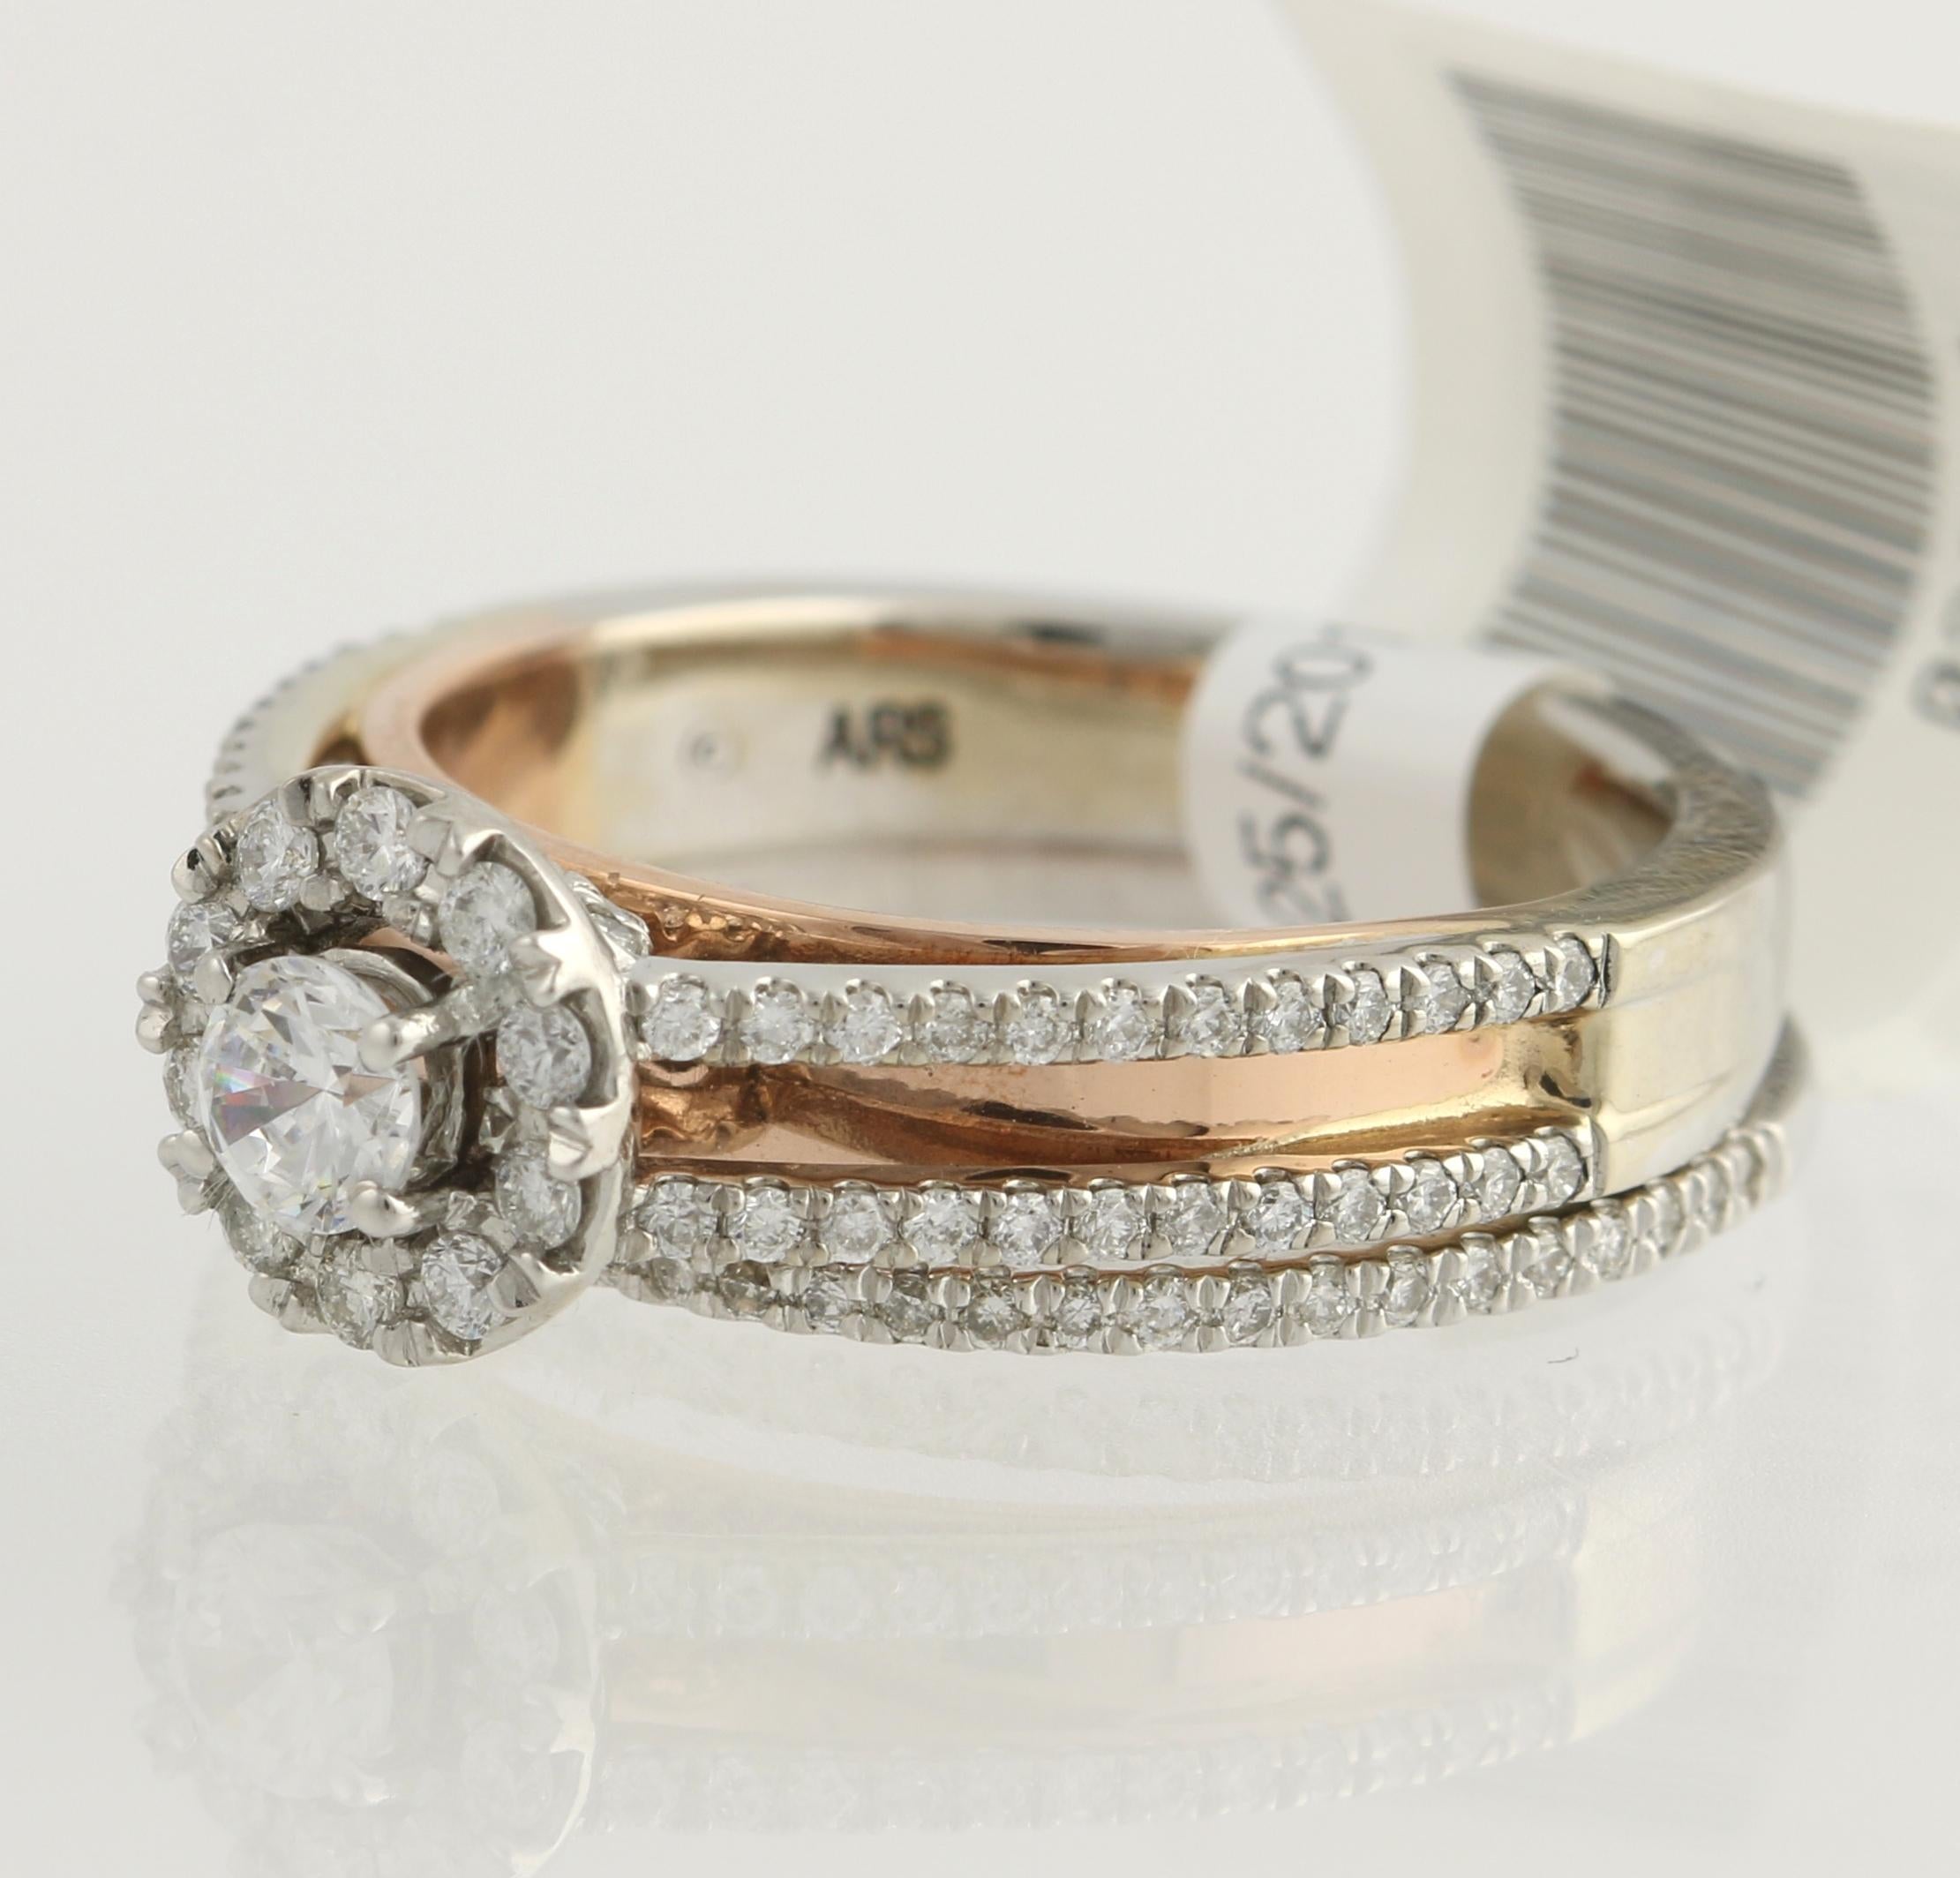 Propose in style with this gorgeous wedding set! Comprised of an engagement ring and matching wedding band, this NEW set is fashioned in popular 14k white gold and includes a bridge band of 14k rose gold. The engagement ring showcases a round cut